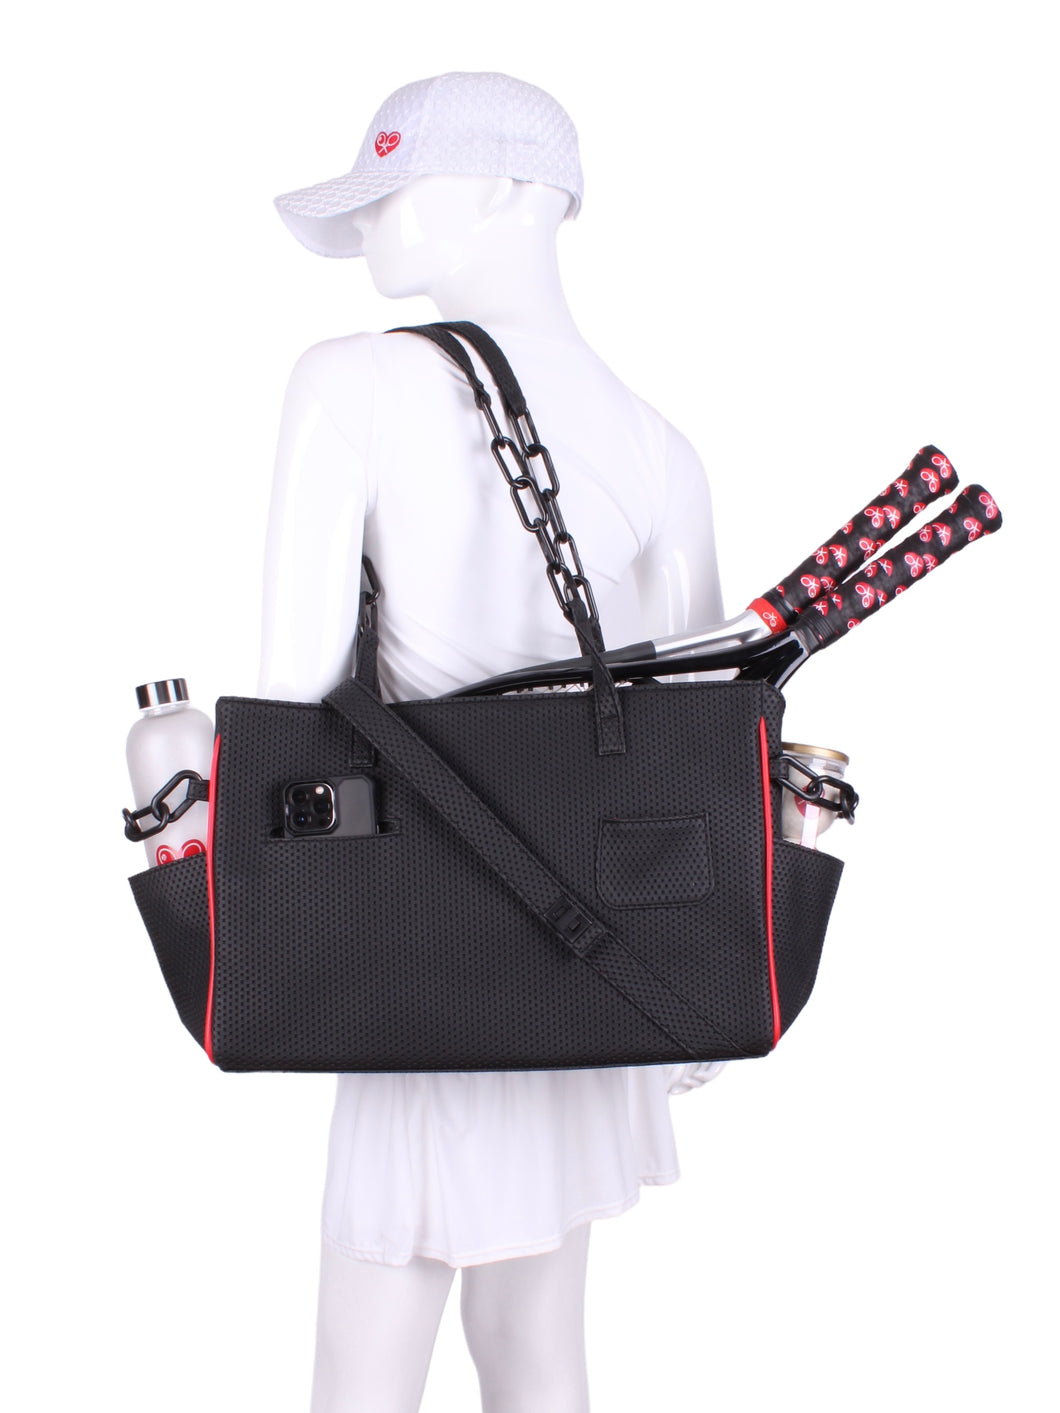 The Long Tennis Tote in Vegan Black Porsche is our stylish, sexy and functional tennis bag designed to carry all your essentials for the game. 